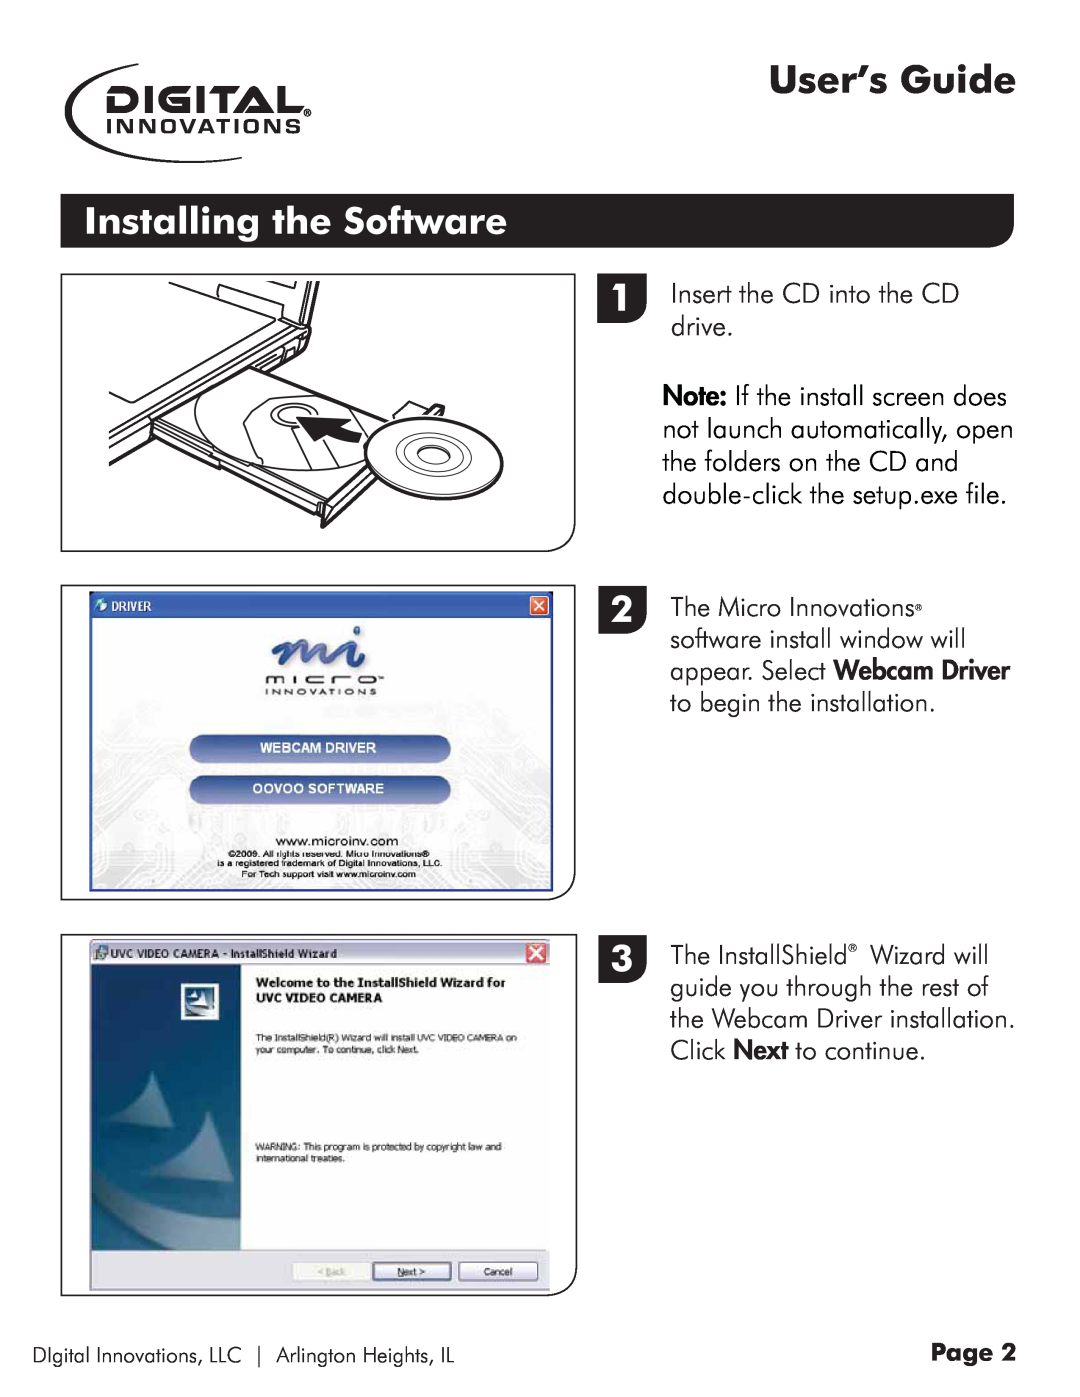 Micro Innovations 4310100 quick start Installing the Software, User’s Guide, Insertdrive. the CD into the CD, Page 